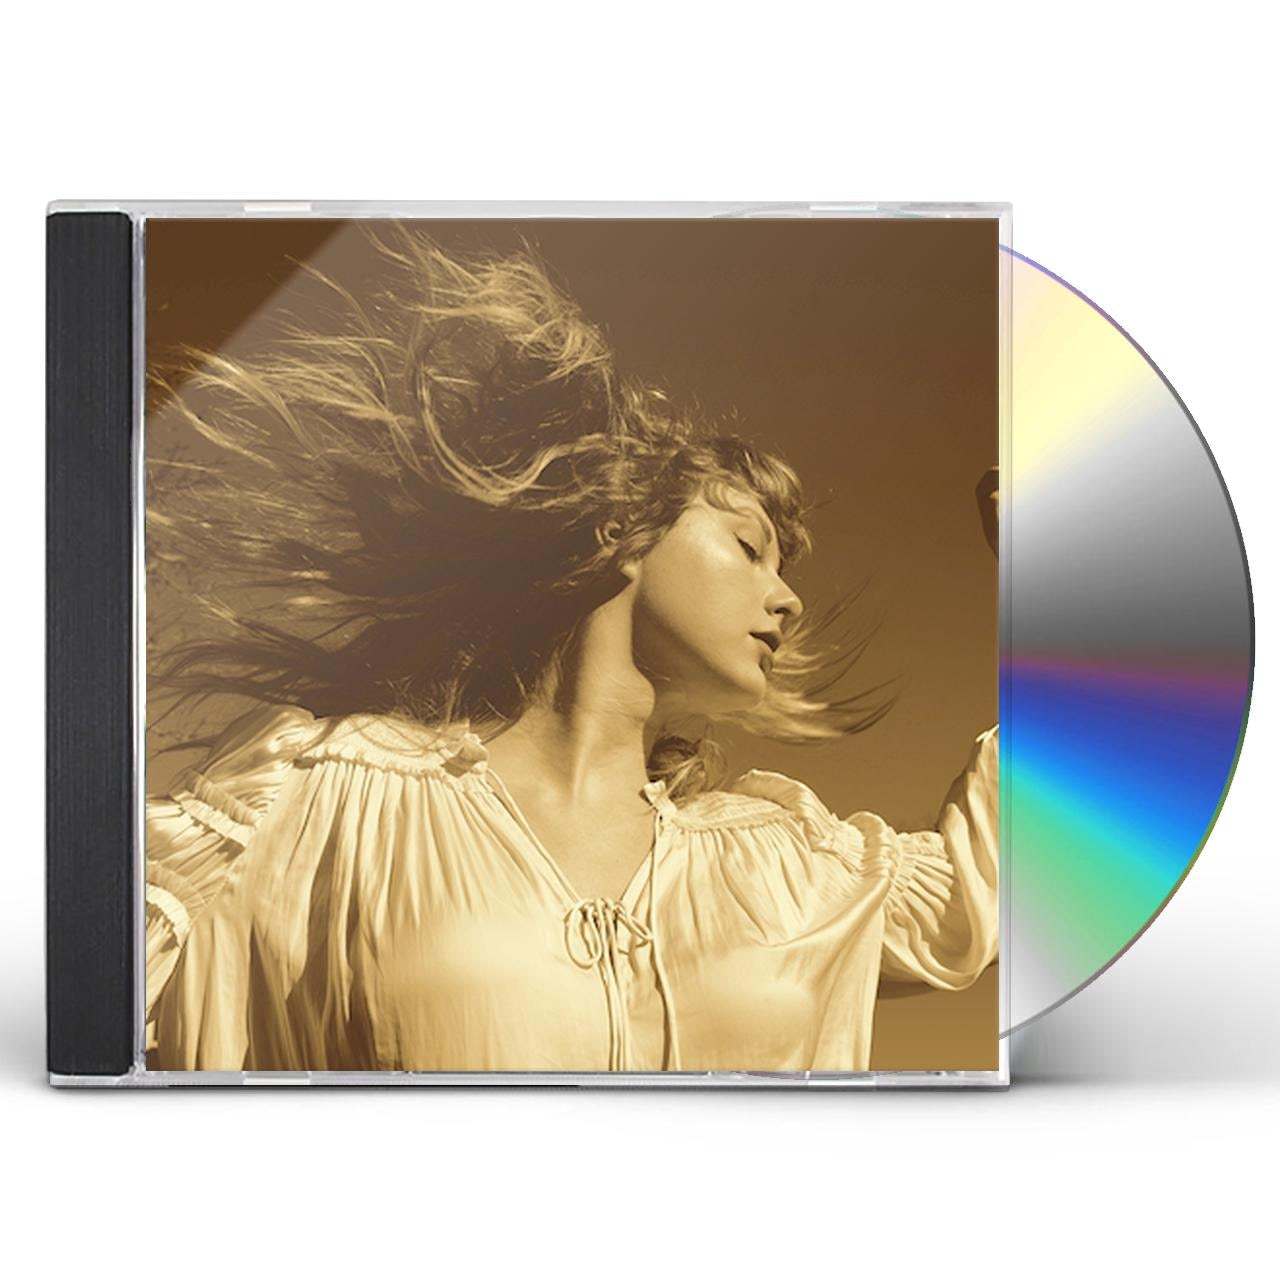 Fearless (Taylor's Version) CD – Taylor Swift Official Store